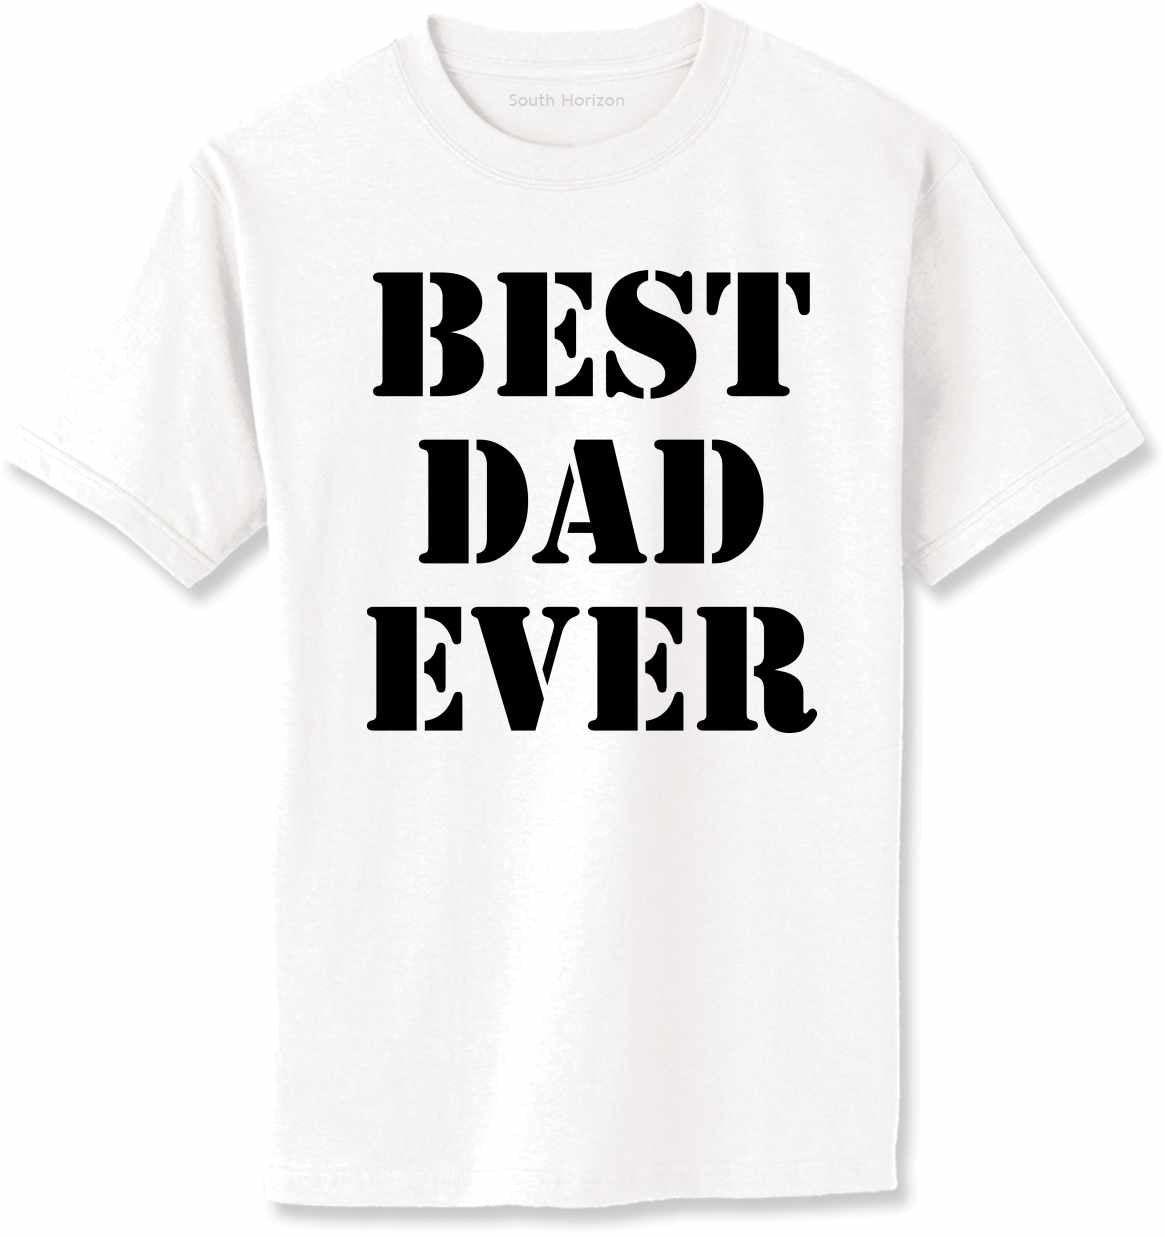 Best Dad Ever Adult T-Shirt (#803-1)